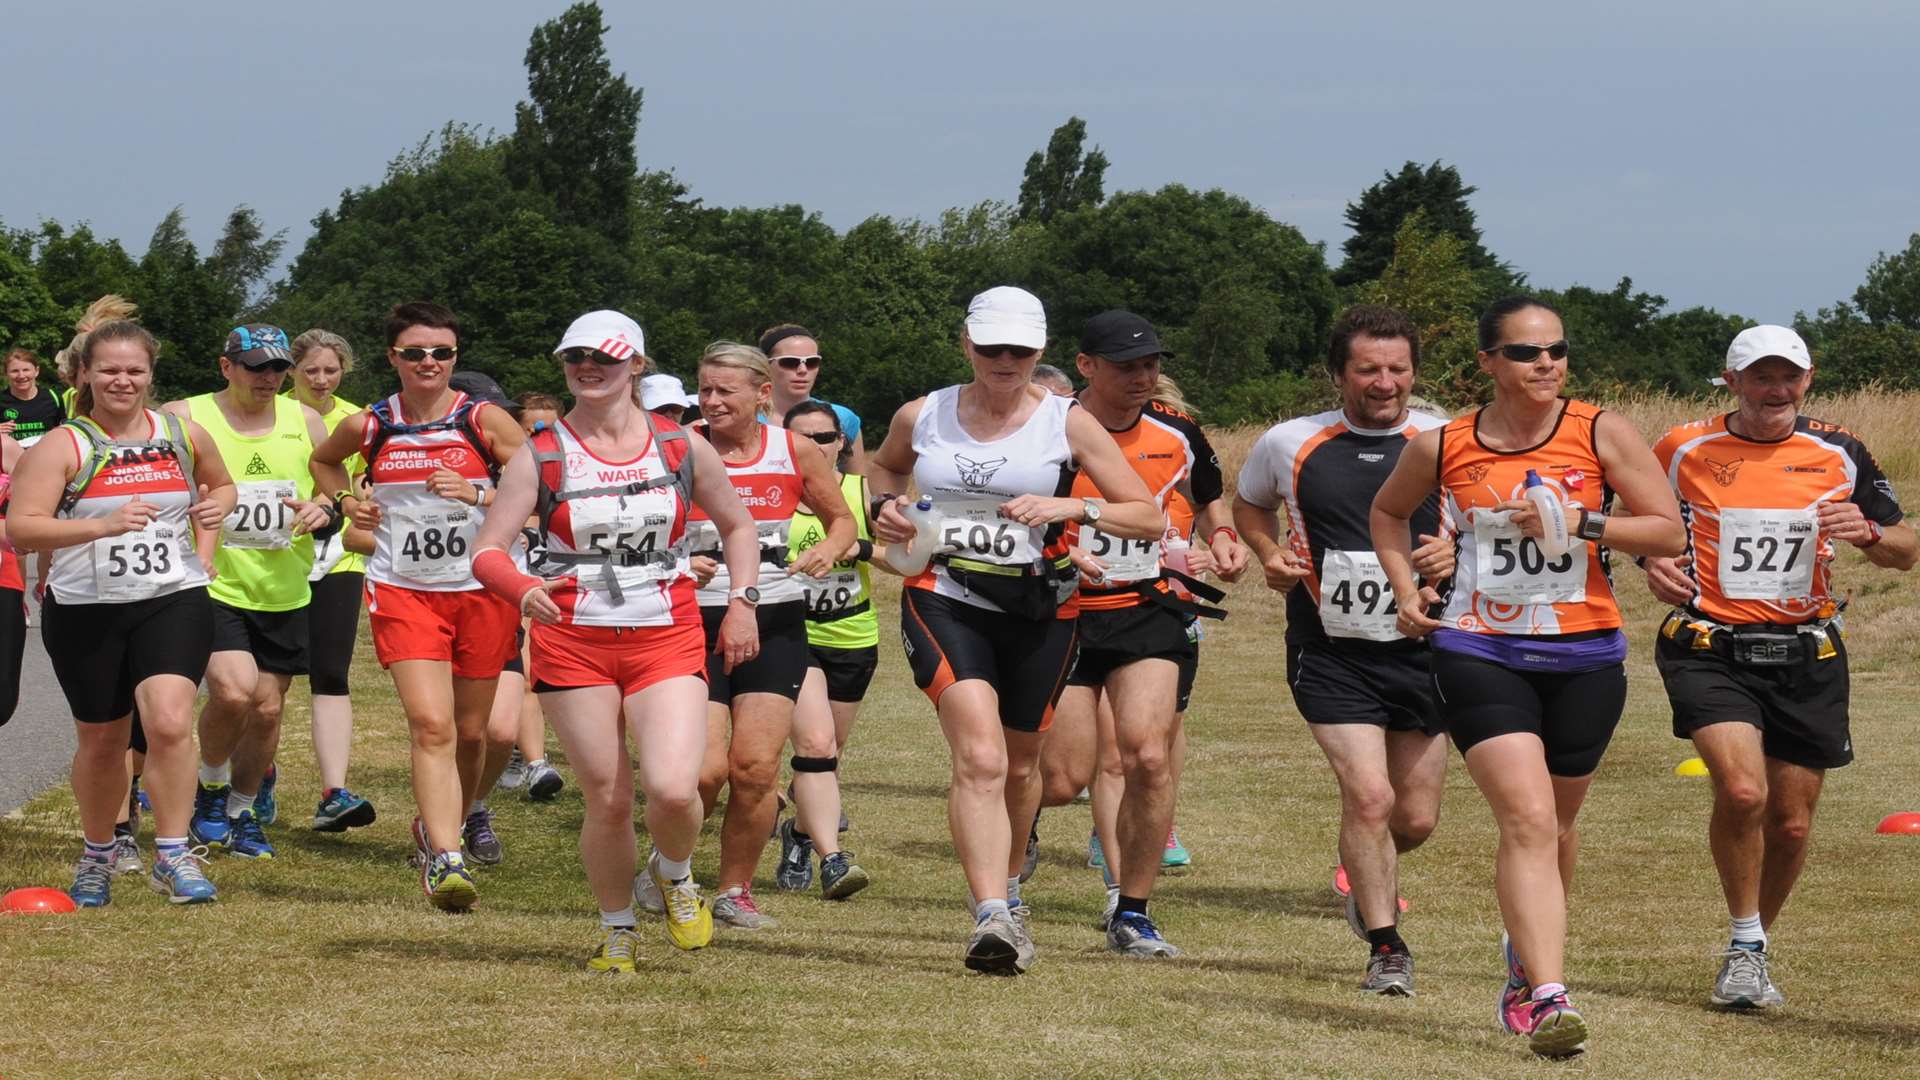 Racers jostle for position at the North Downs Run Picture: Steve Crispe